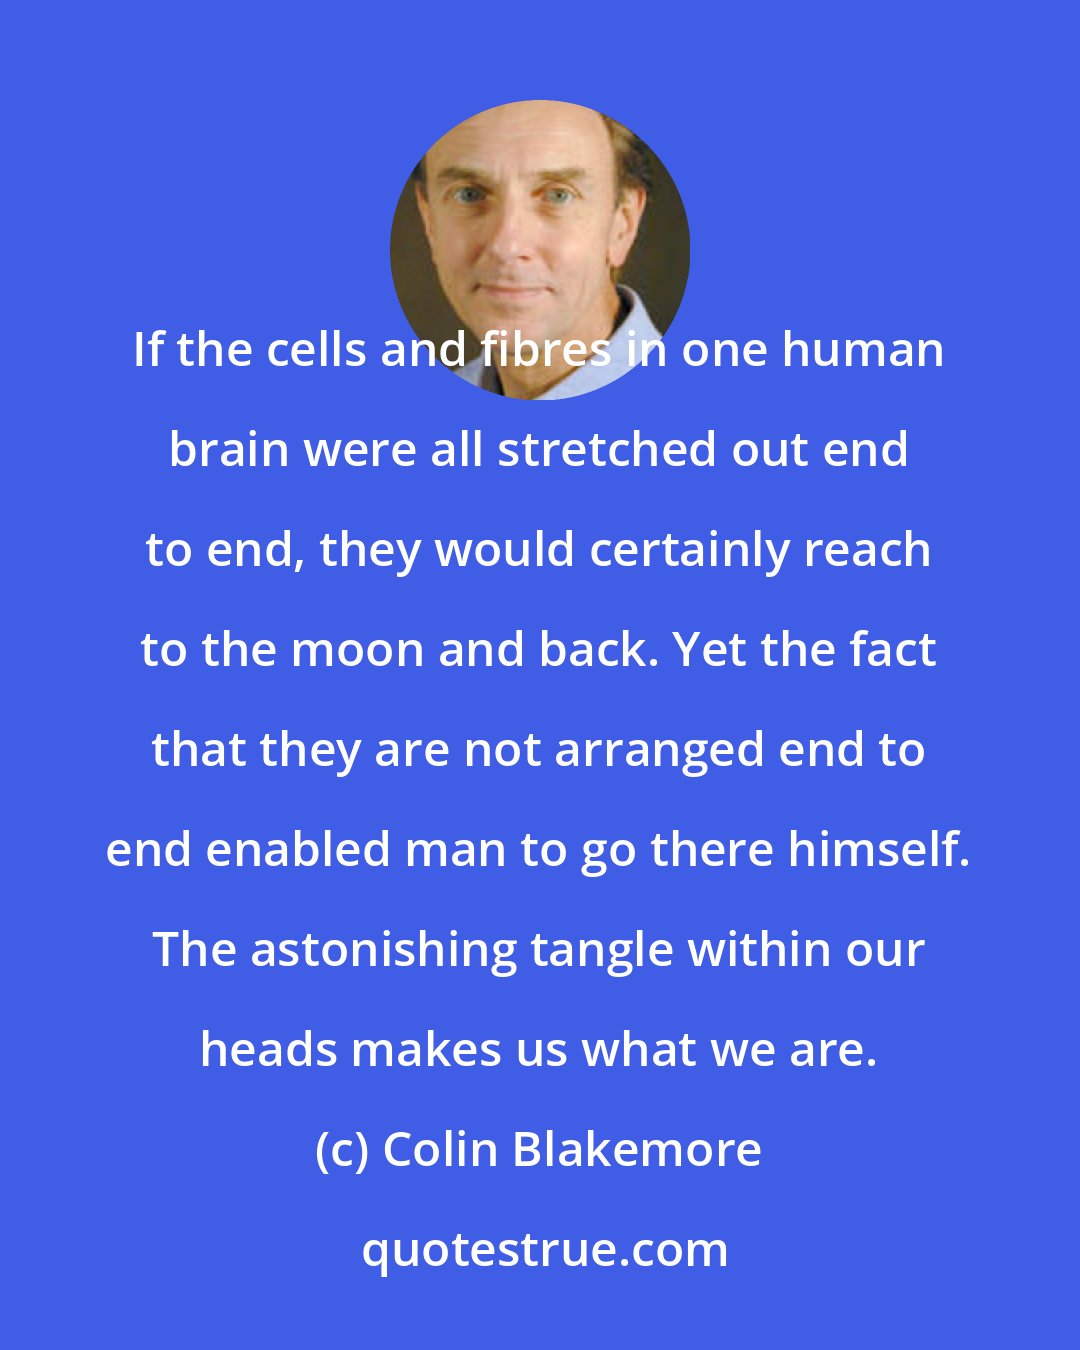 Colin Blakemore: If the cells and fibres in one human brain were all stretched out end to end, they would certainly reach to the moon and back. Yet the fact that they are not arranged end to end enabled man to go there himself. The astonishing tangle within our heads makes us what we are.